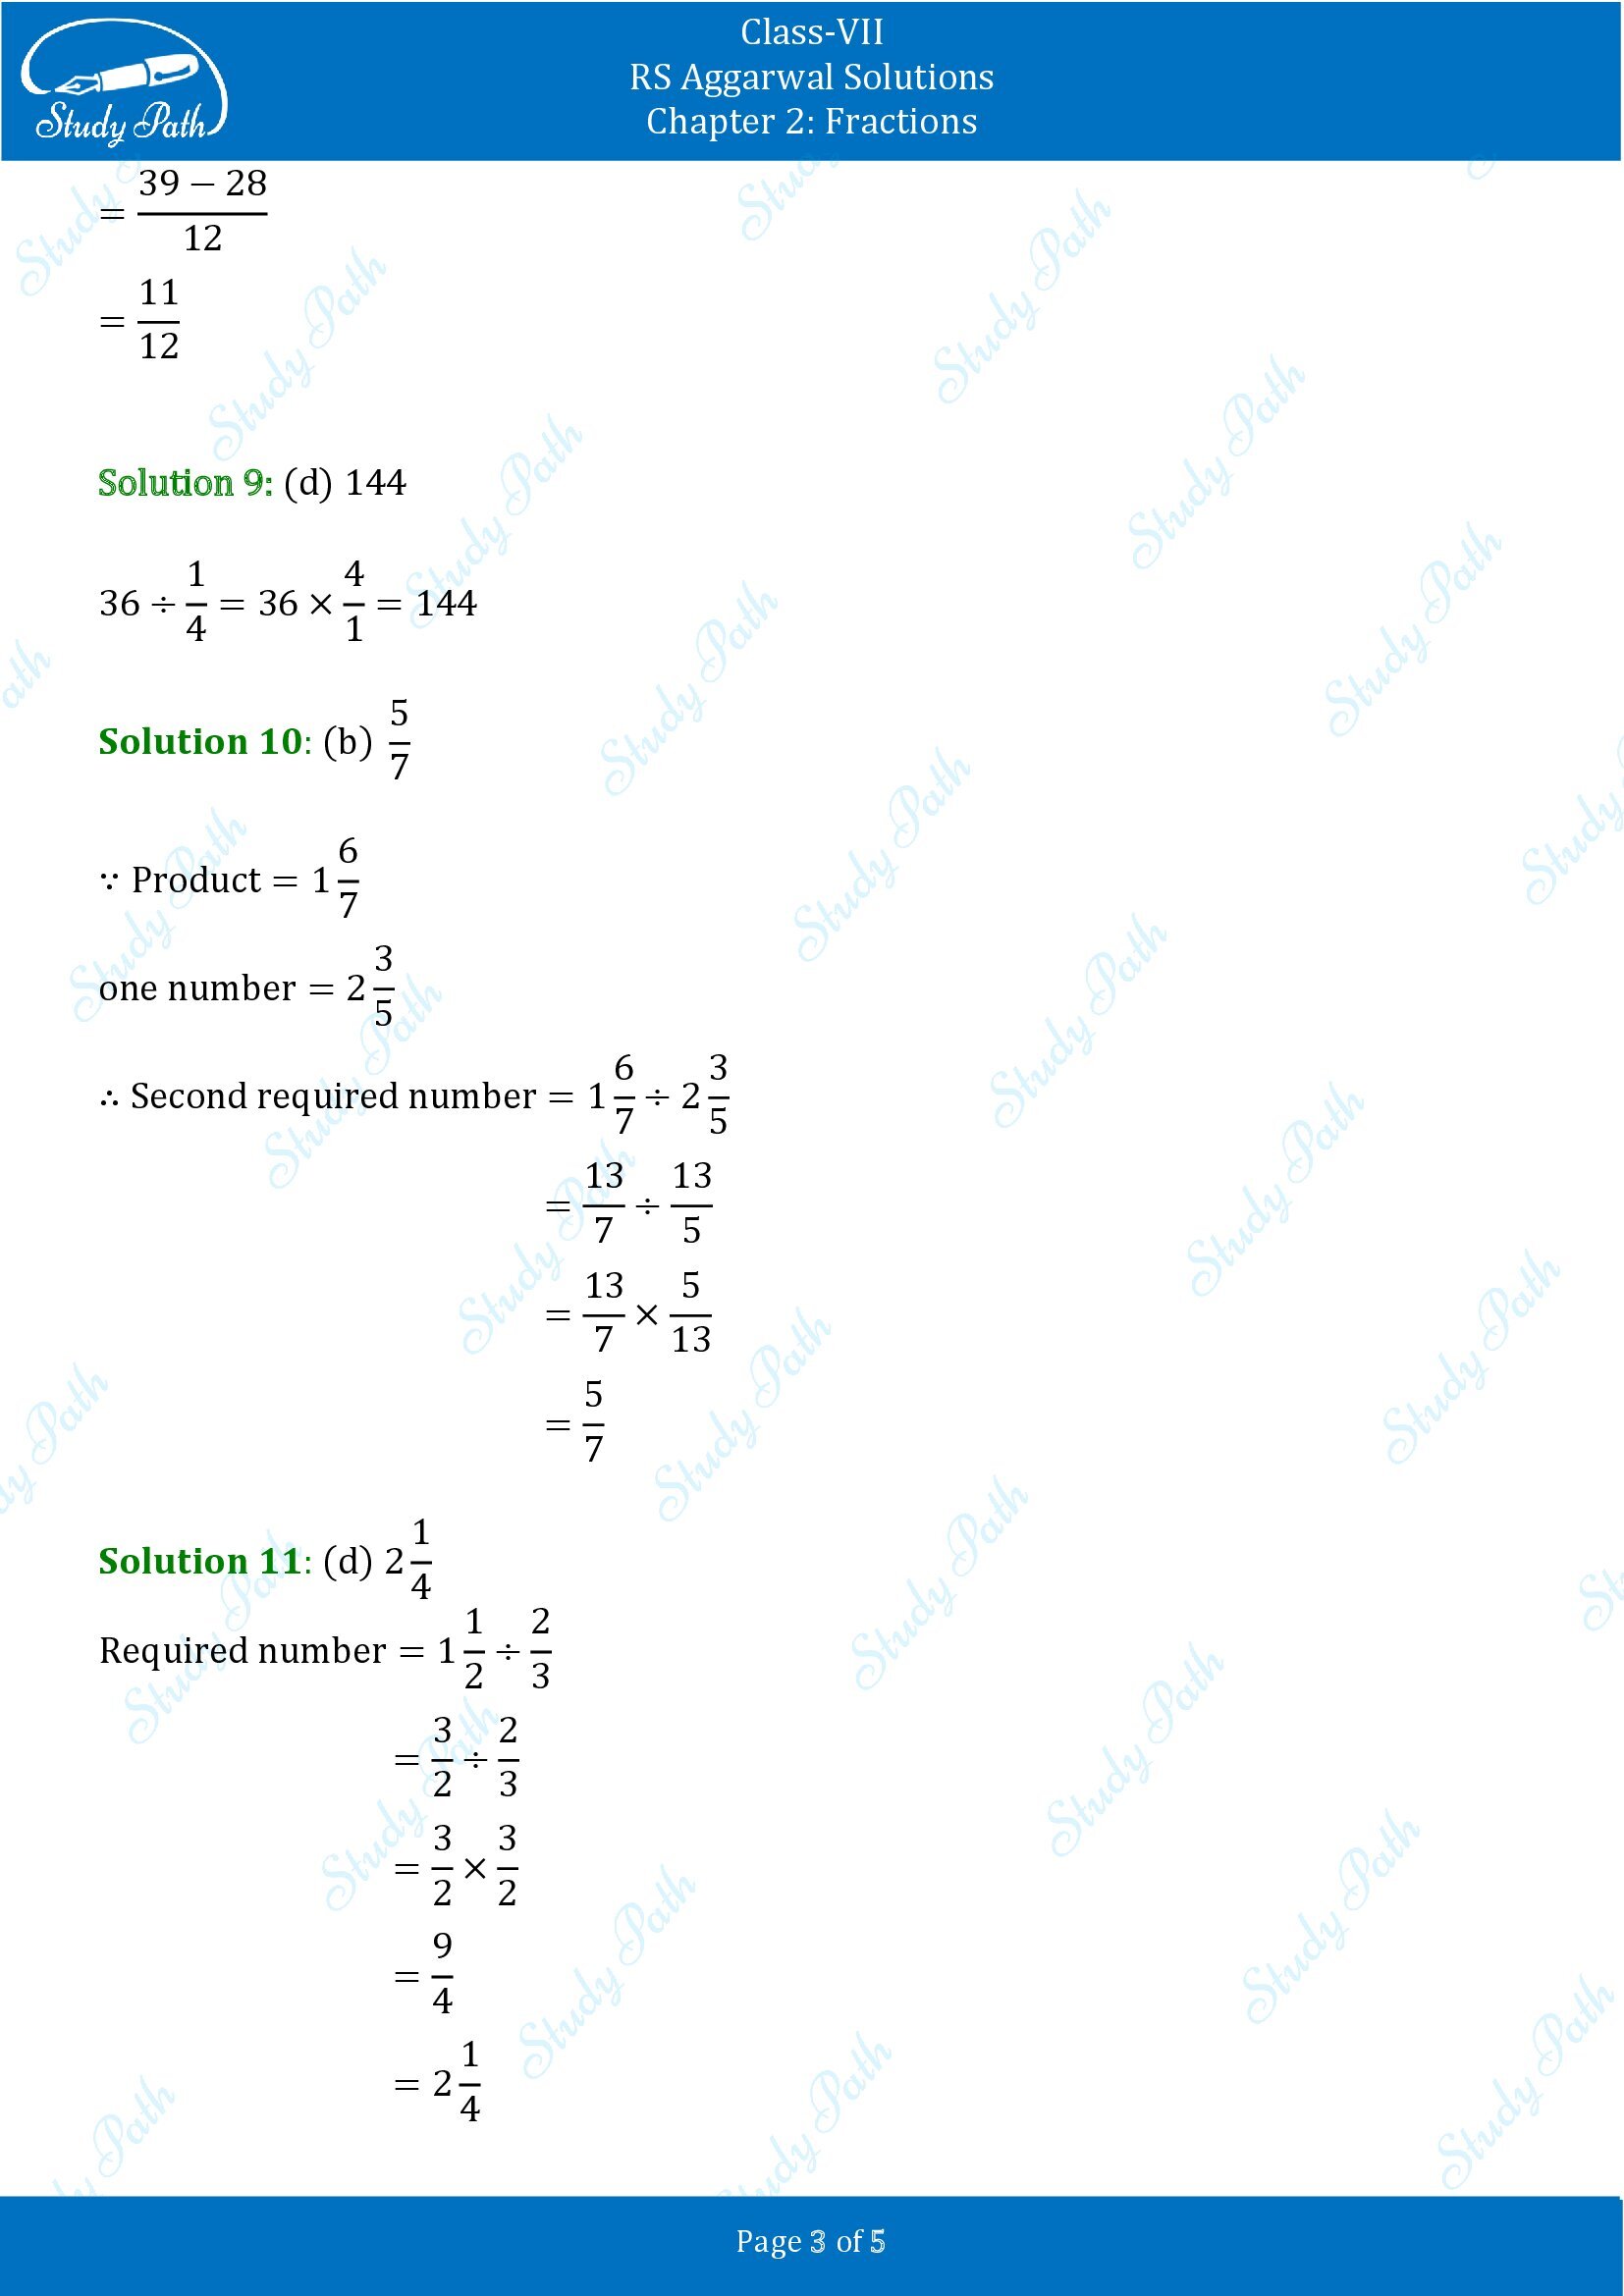 RS Aggarwal Solutions Class 7 Chapter 2 Fractions Exercise 2D MCQs 0003